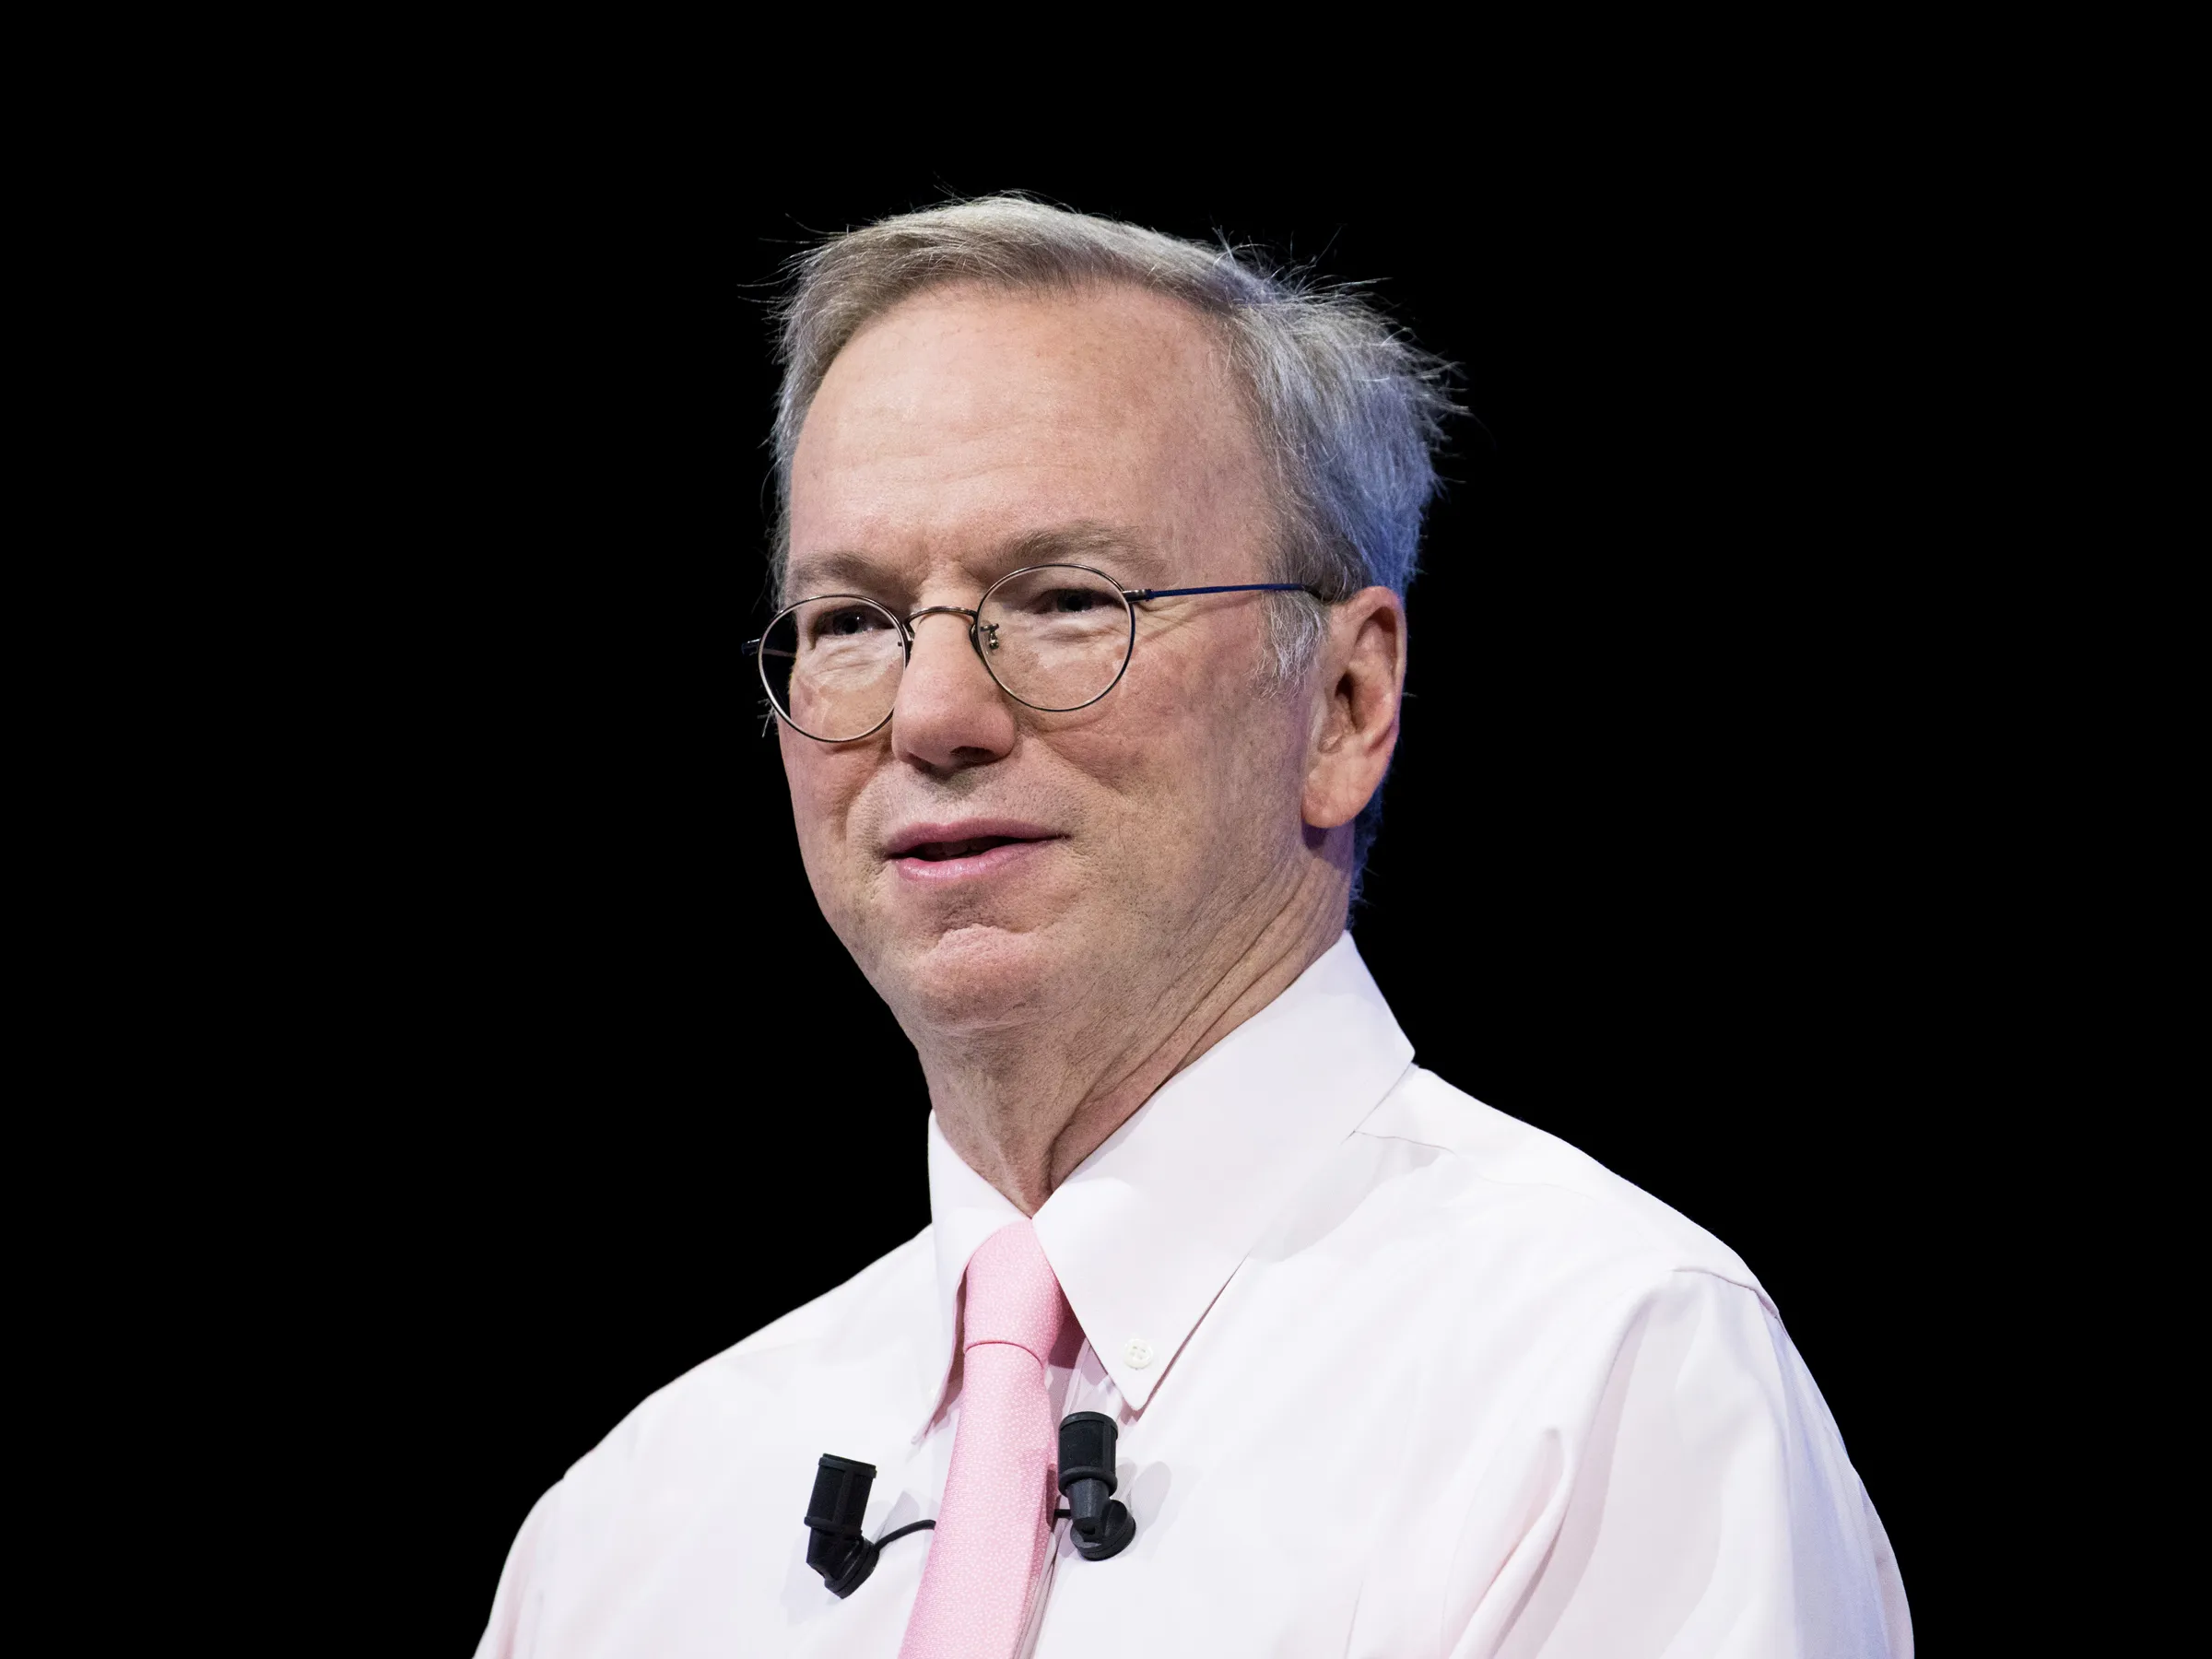 Schmidt's Departure in 2009 Marked a Turning Point in the Apple-Google Relationship